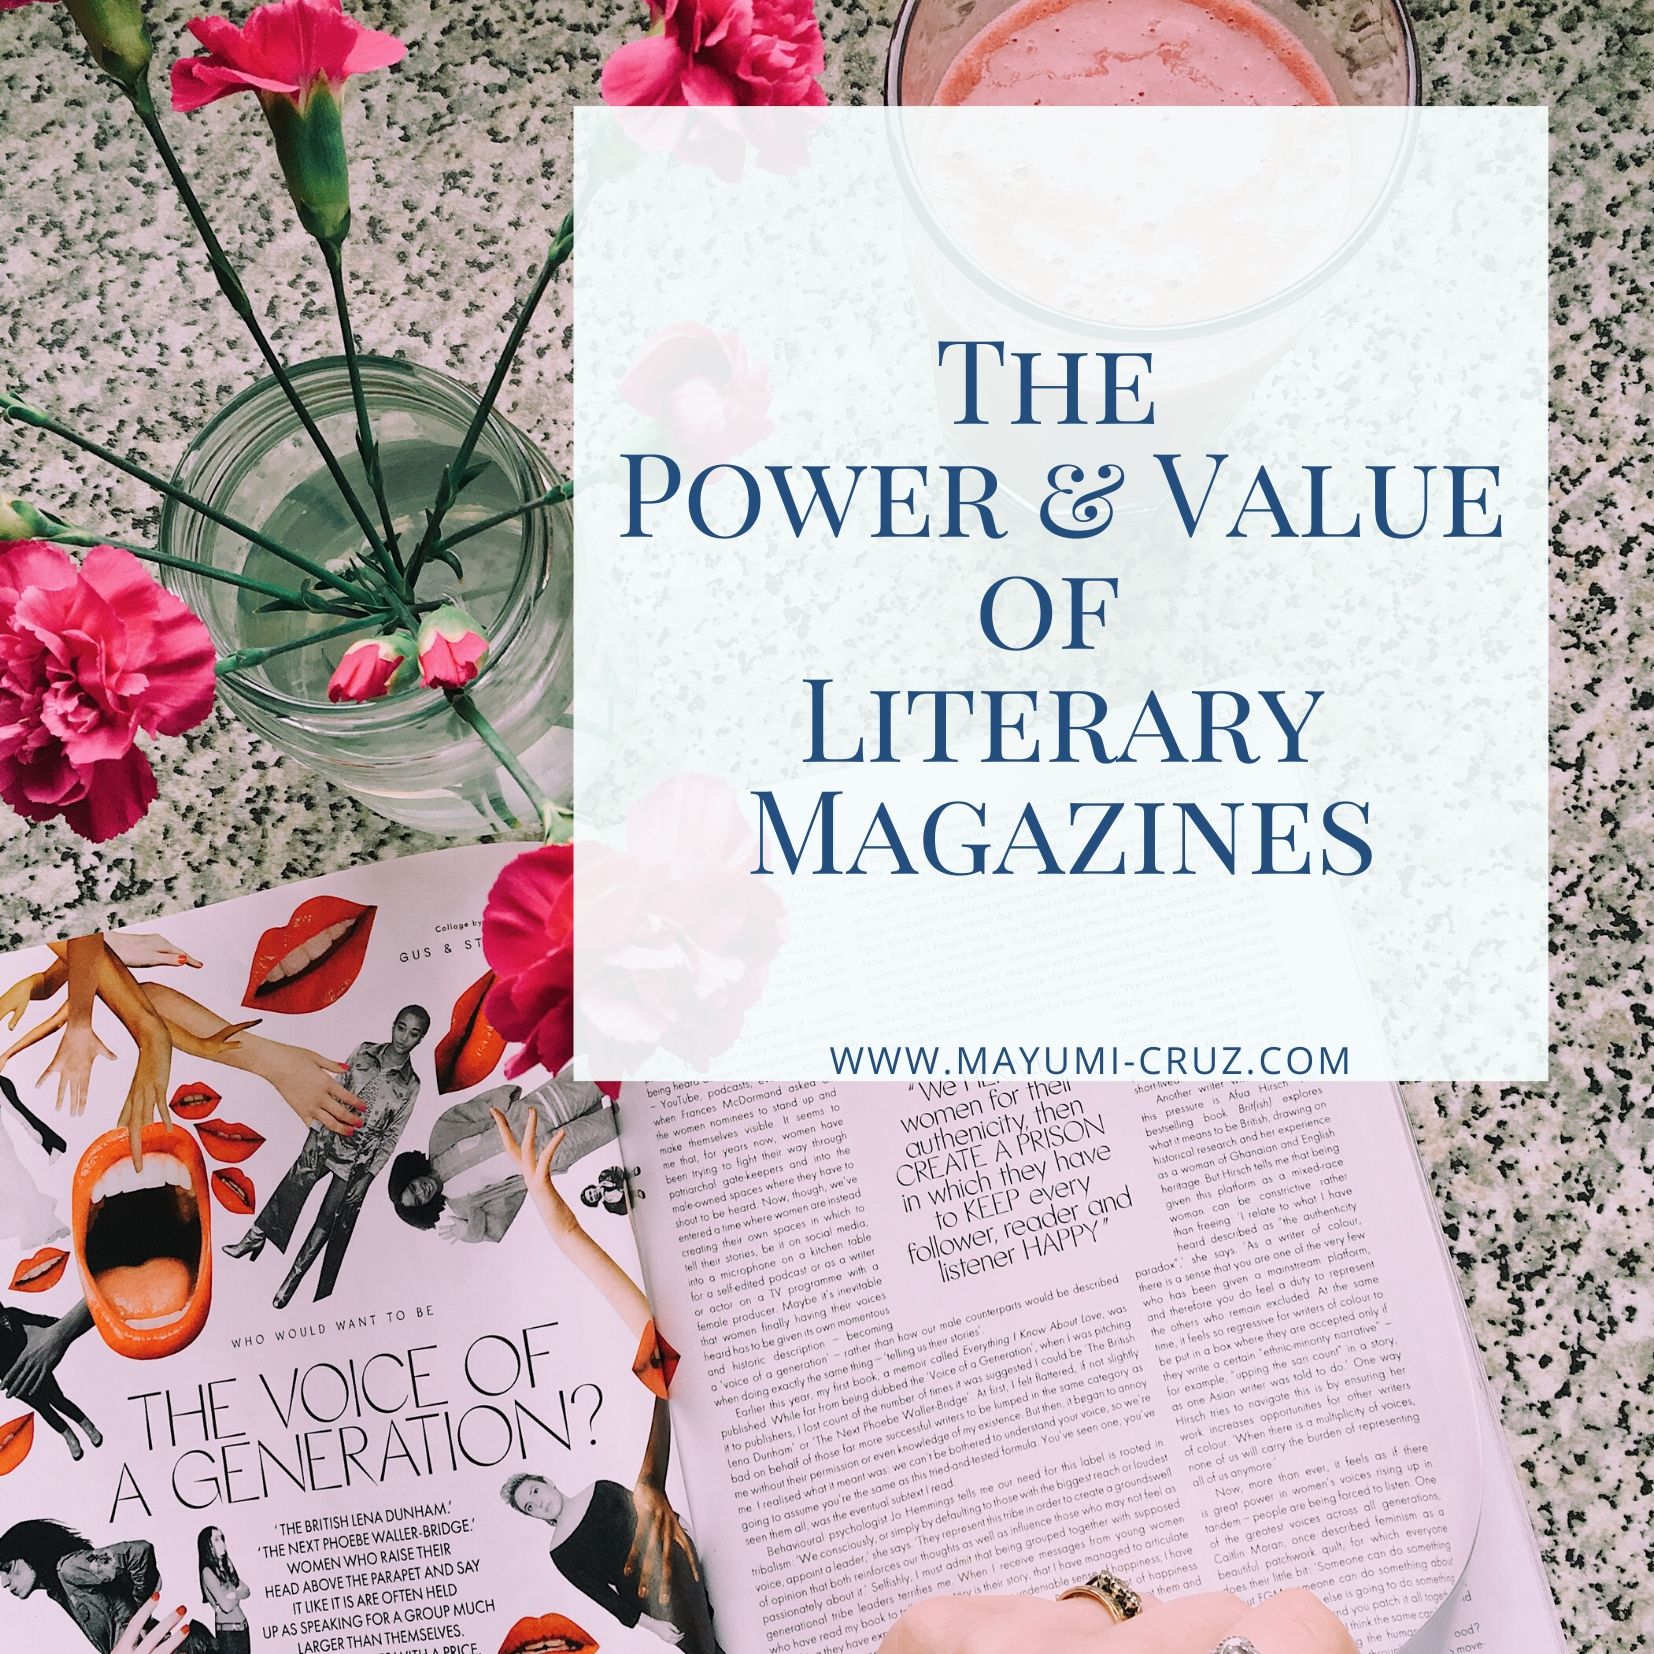 The Power and Value of Literary Magazines